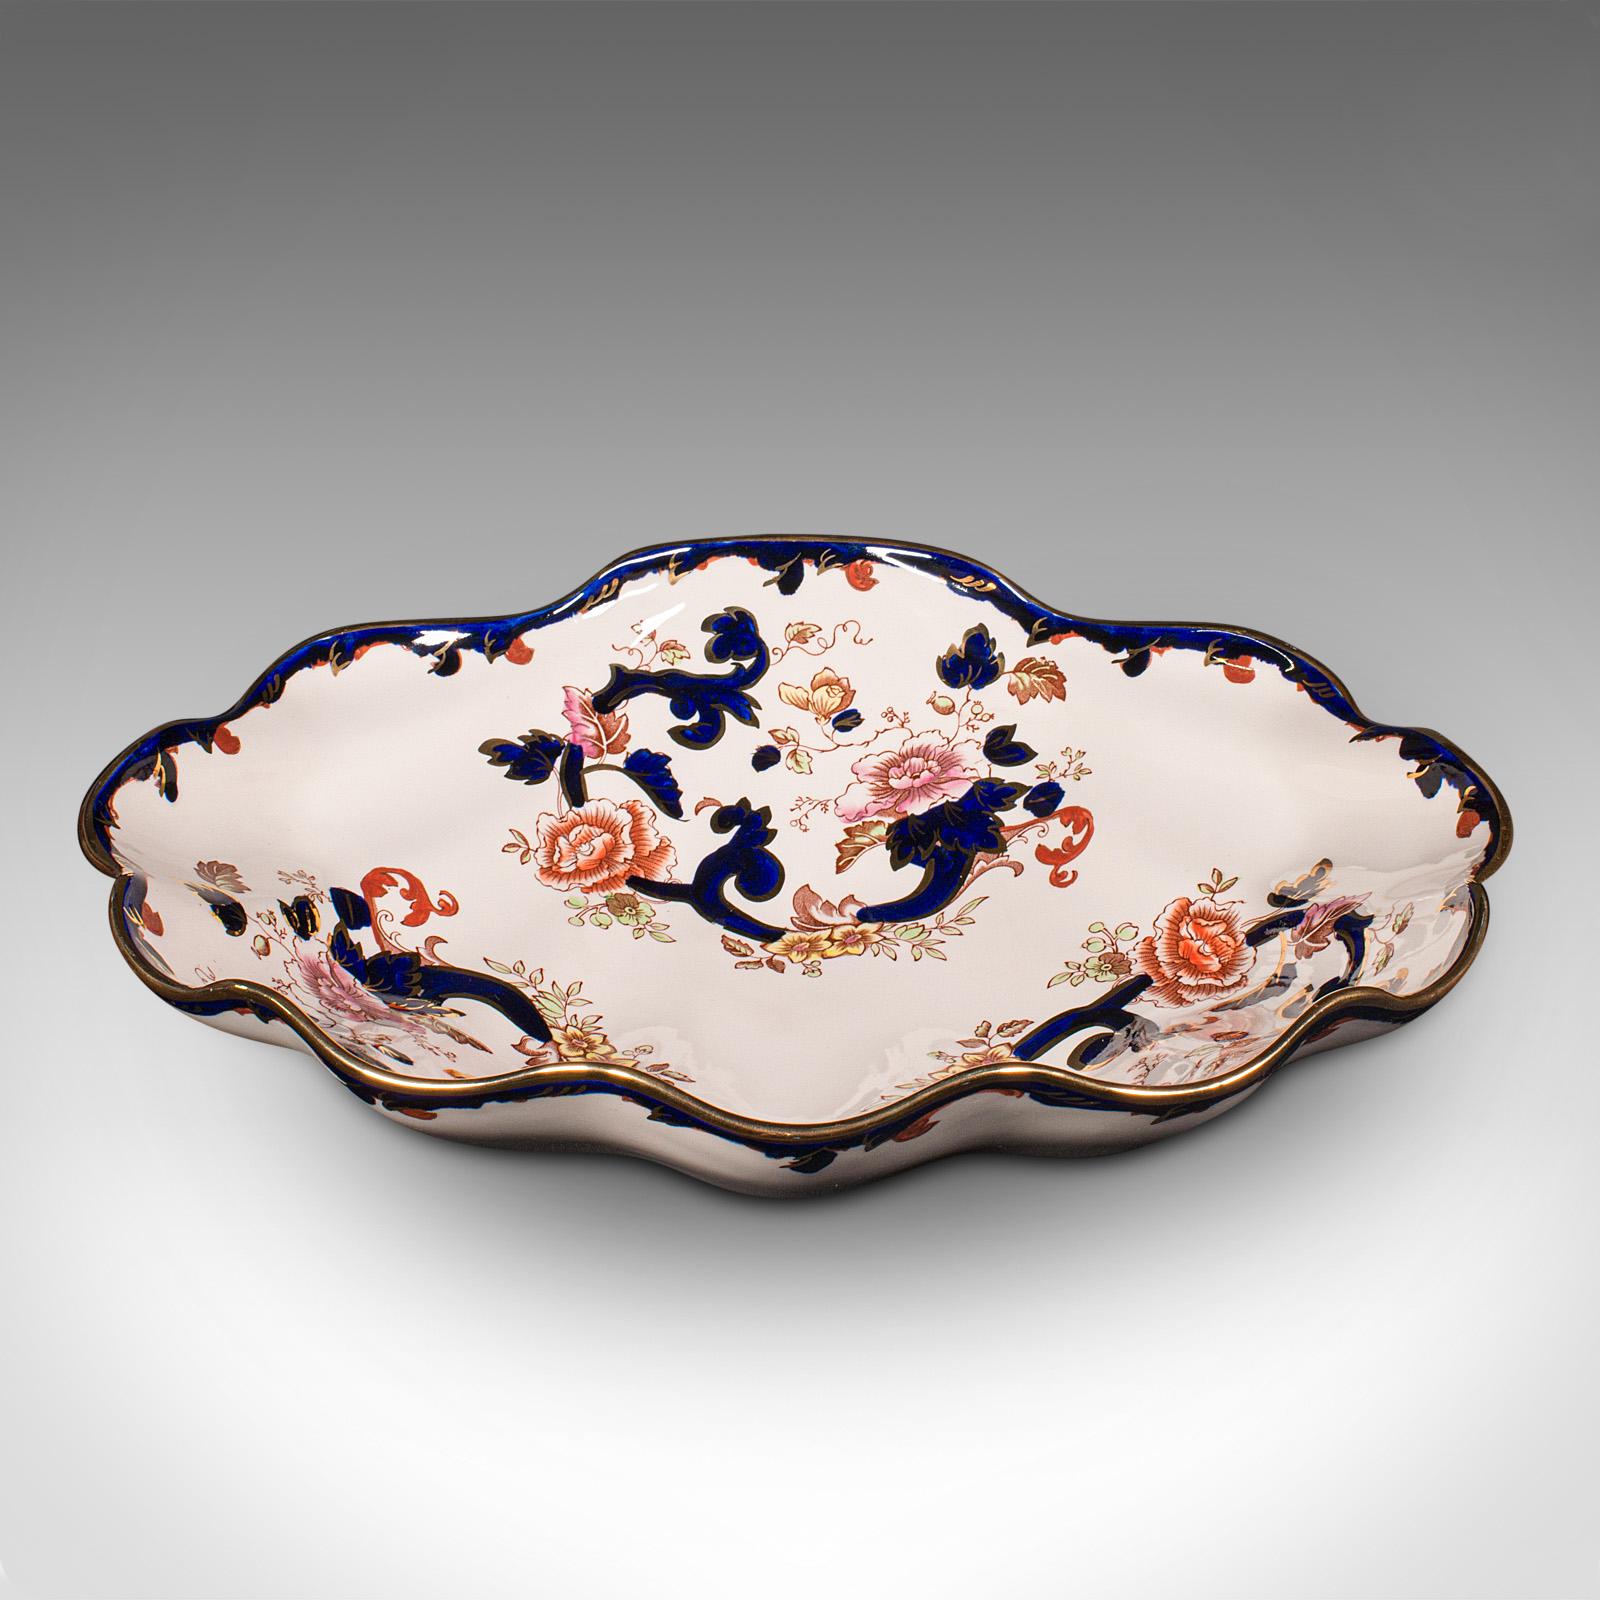 This is a large vintage shell shaped fruit bowl. An English, ceramic decorative serving dish, dating to the late 20th century, circa 1970.

Fascinatingly formed fruit bowl, with appealing decor
Displaying a desirable aged patina and in good